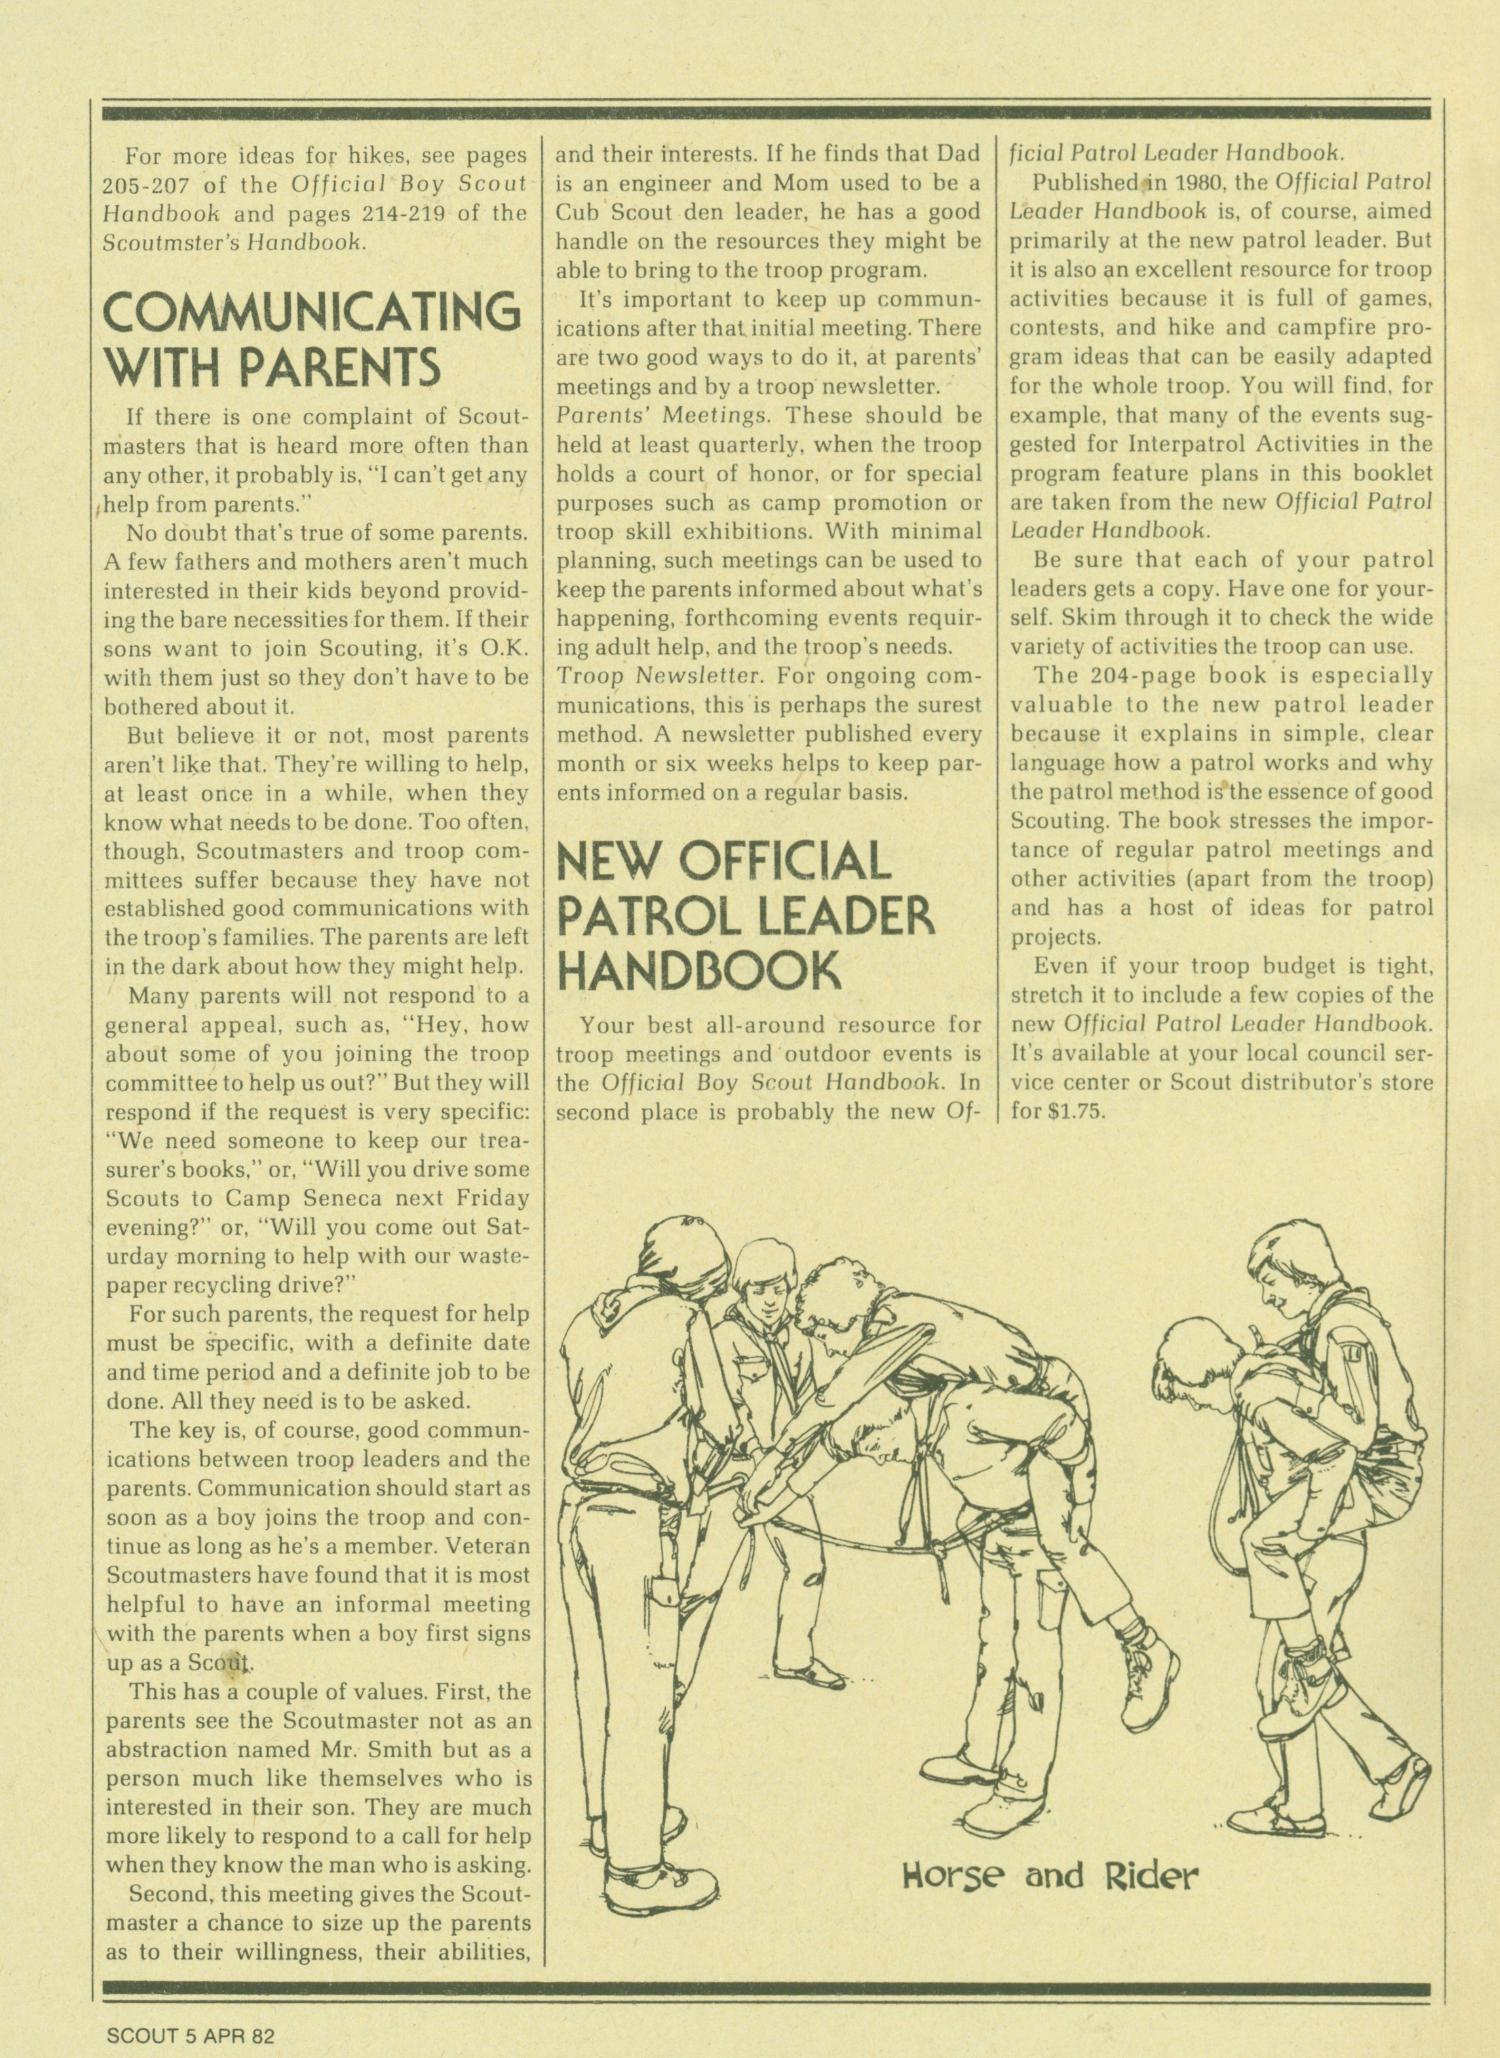 Scouting, Volume 70, Number 1, January-February 1982
                                                
                                                    5
                                                